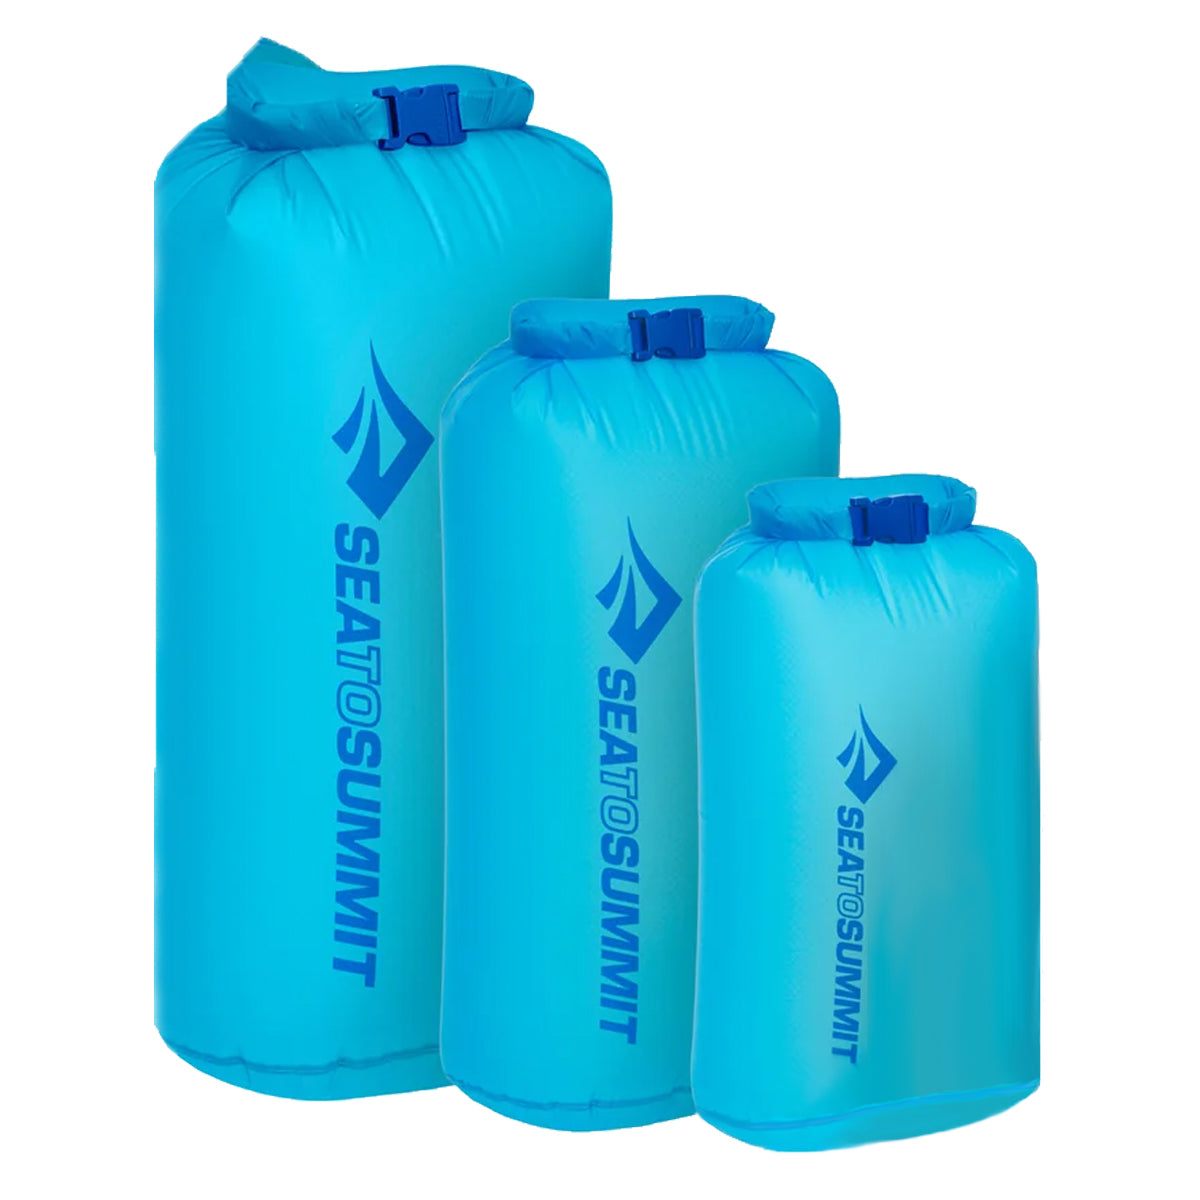 Sea to Summit Ultra-Sil Dry Bag in  by GOHUNT | Sea to Summit - GOHUNT Shop